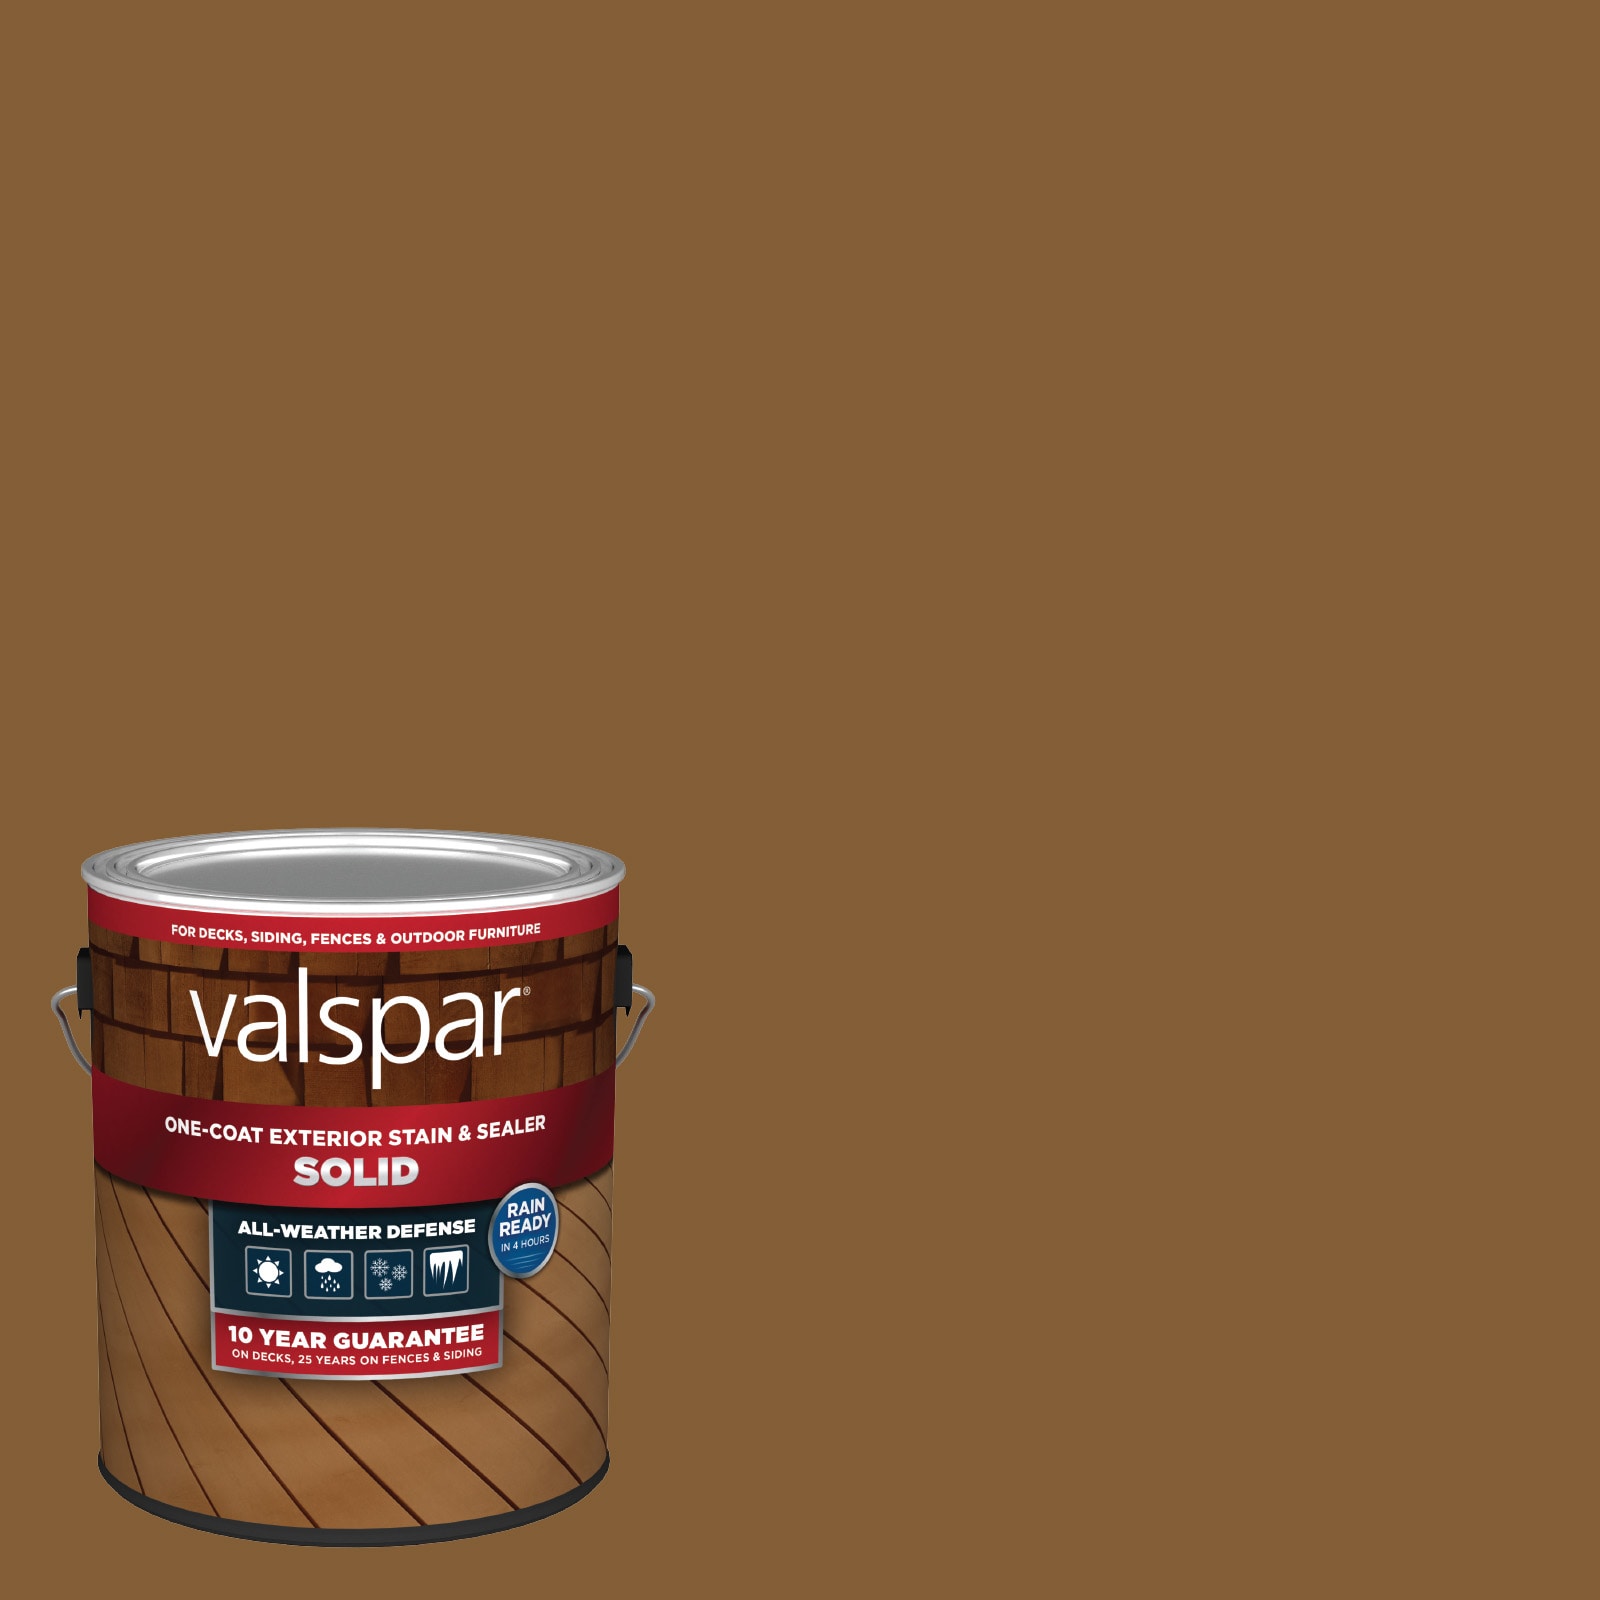 Pinebark Solid Exterior Wood Stain and Sealer (1-Gallon) in Brown | - Valspar PINEBARK-1028091